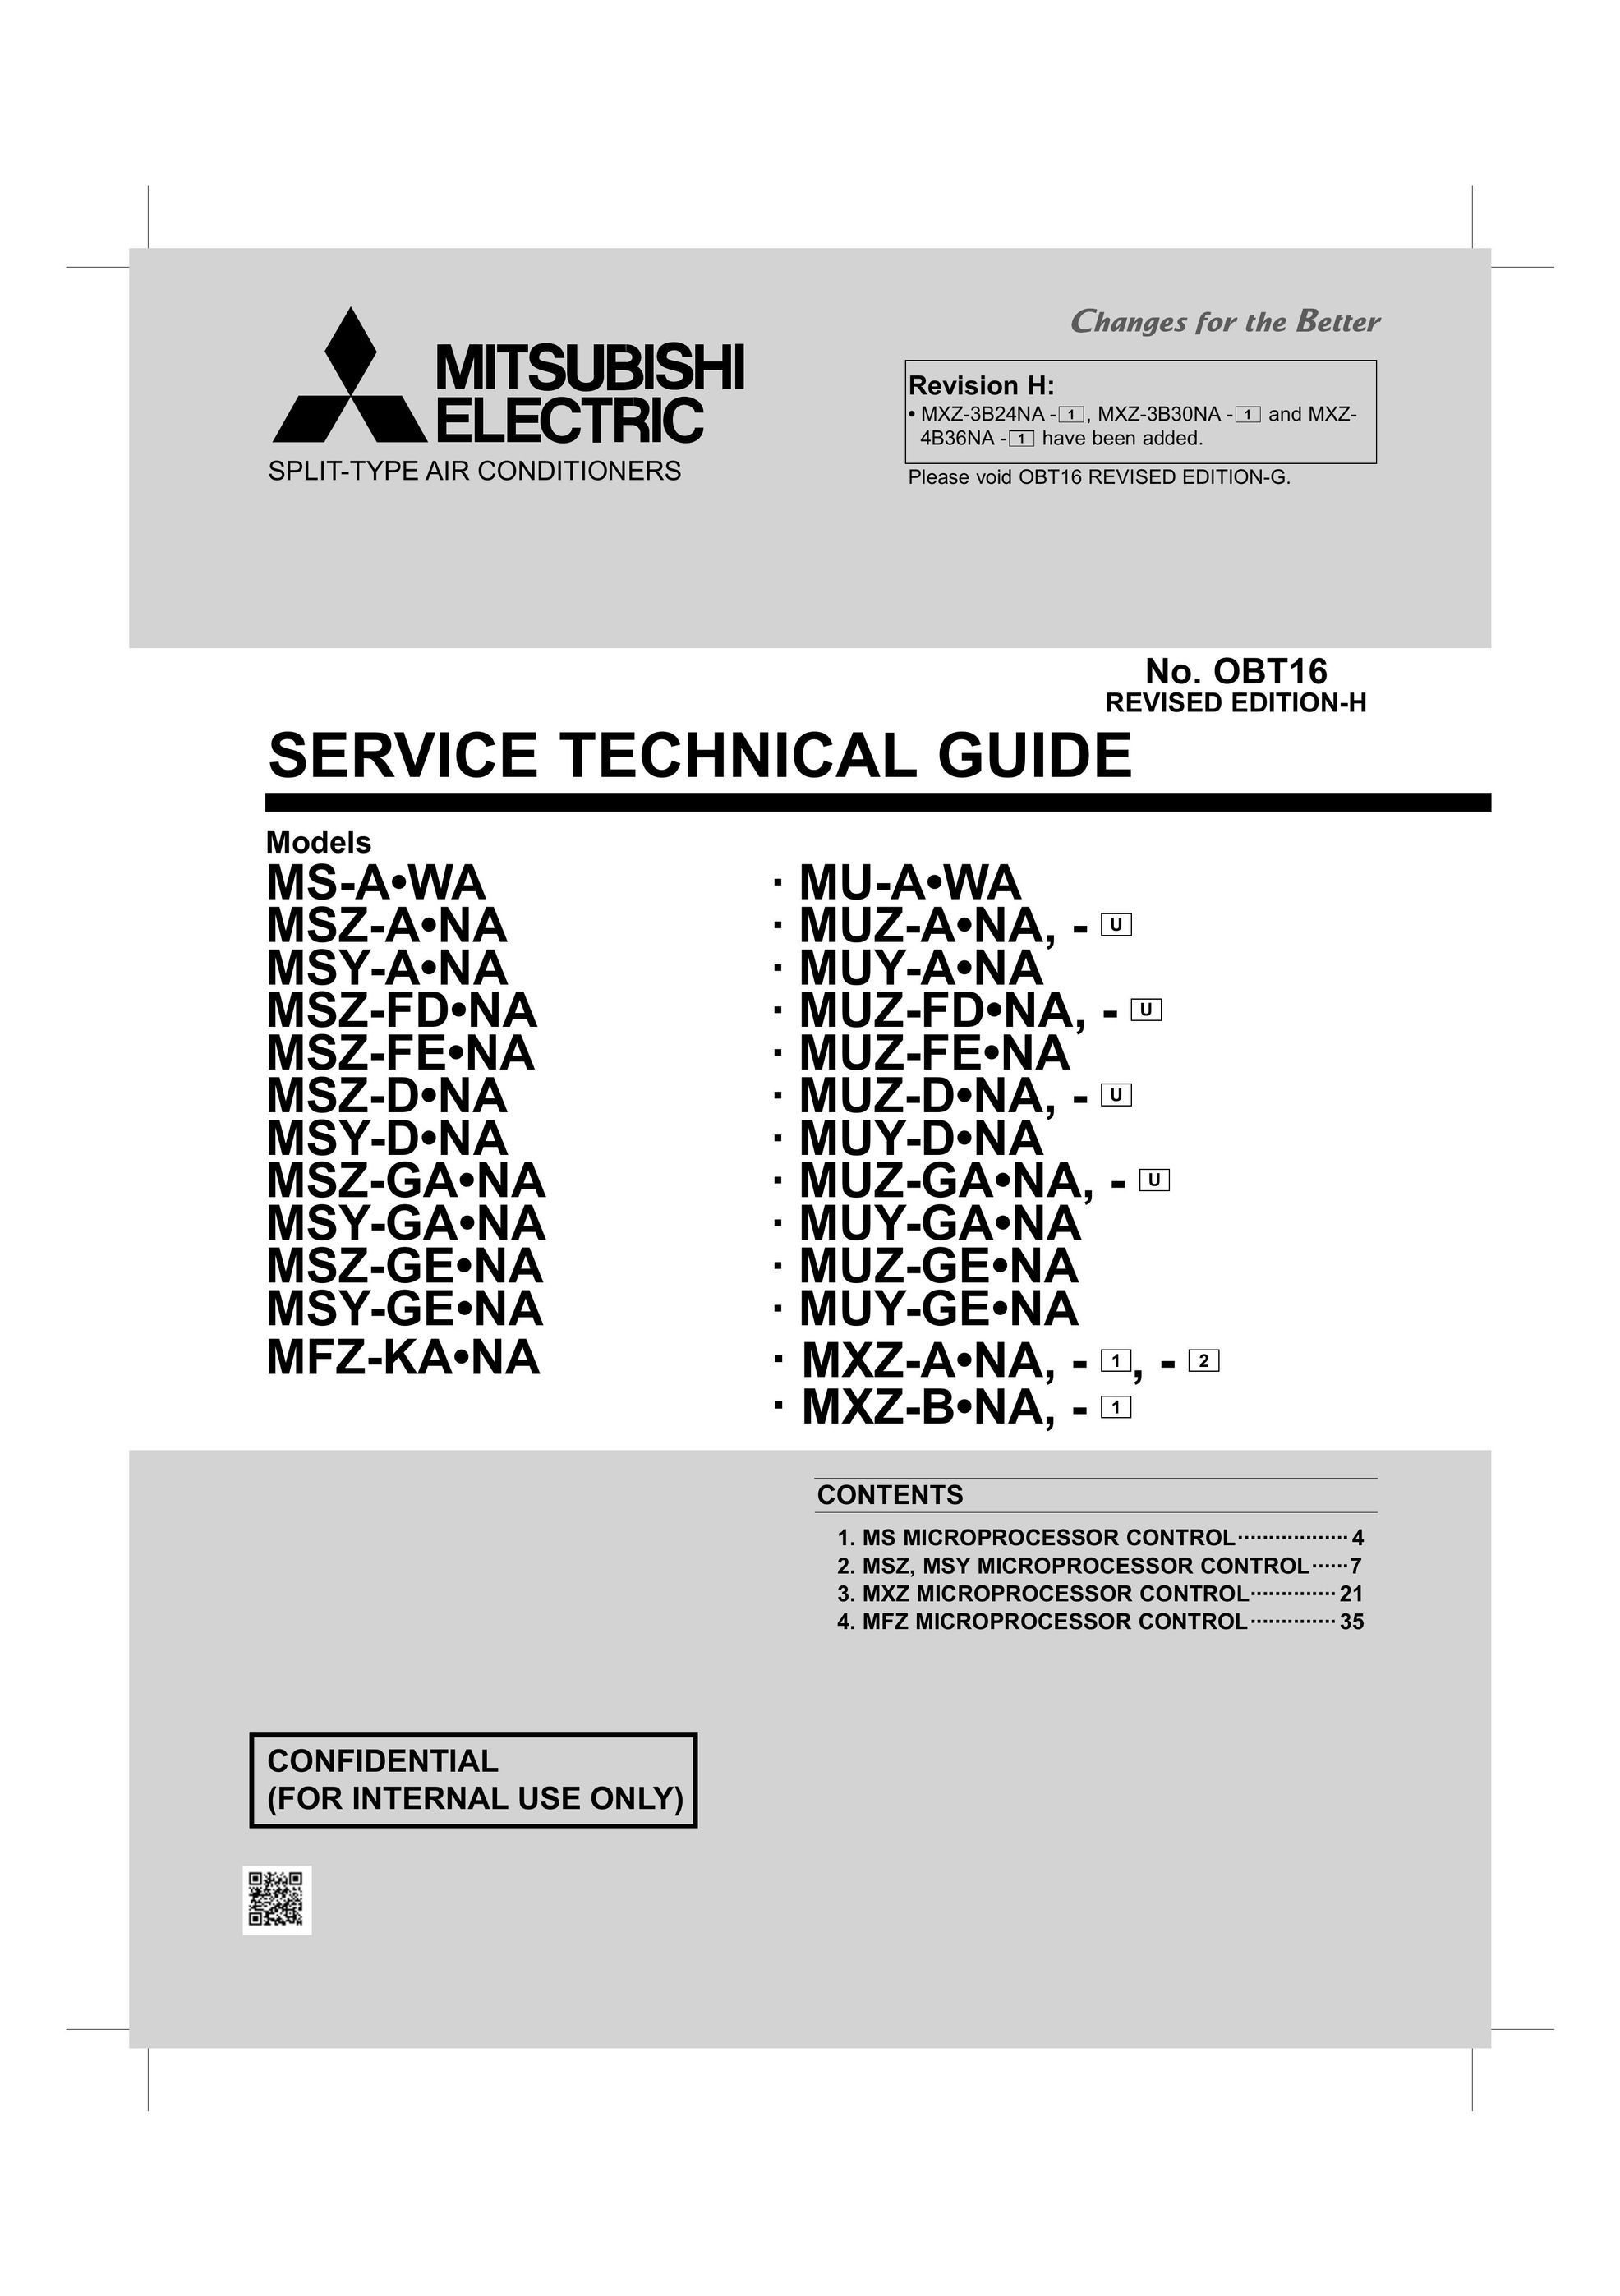 Mitsumi electronic MSY-GENA Air Conditioner User Manual